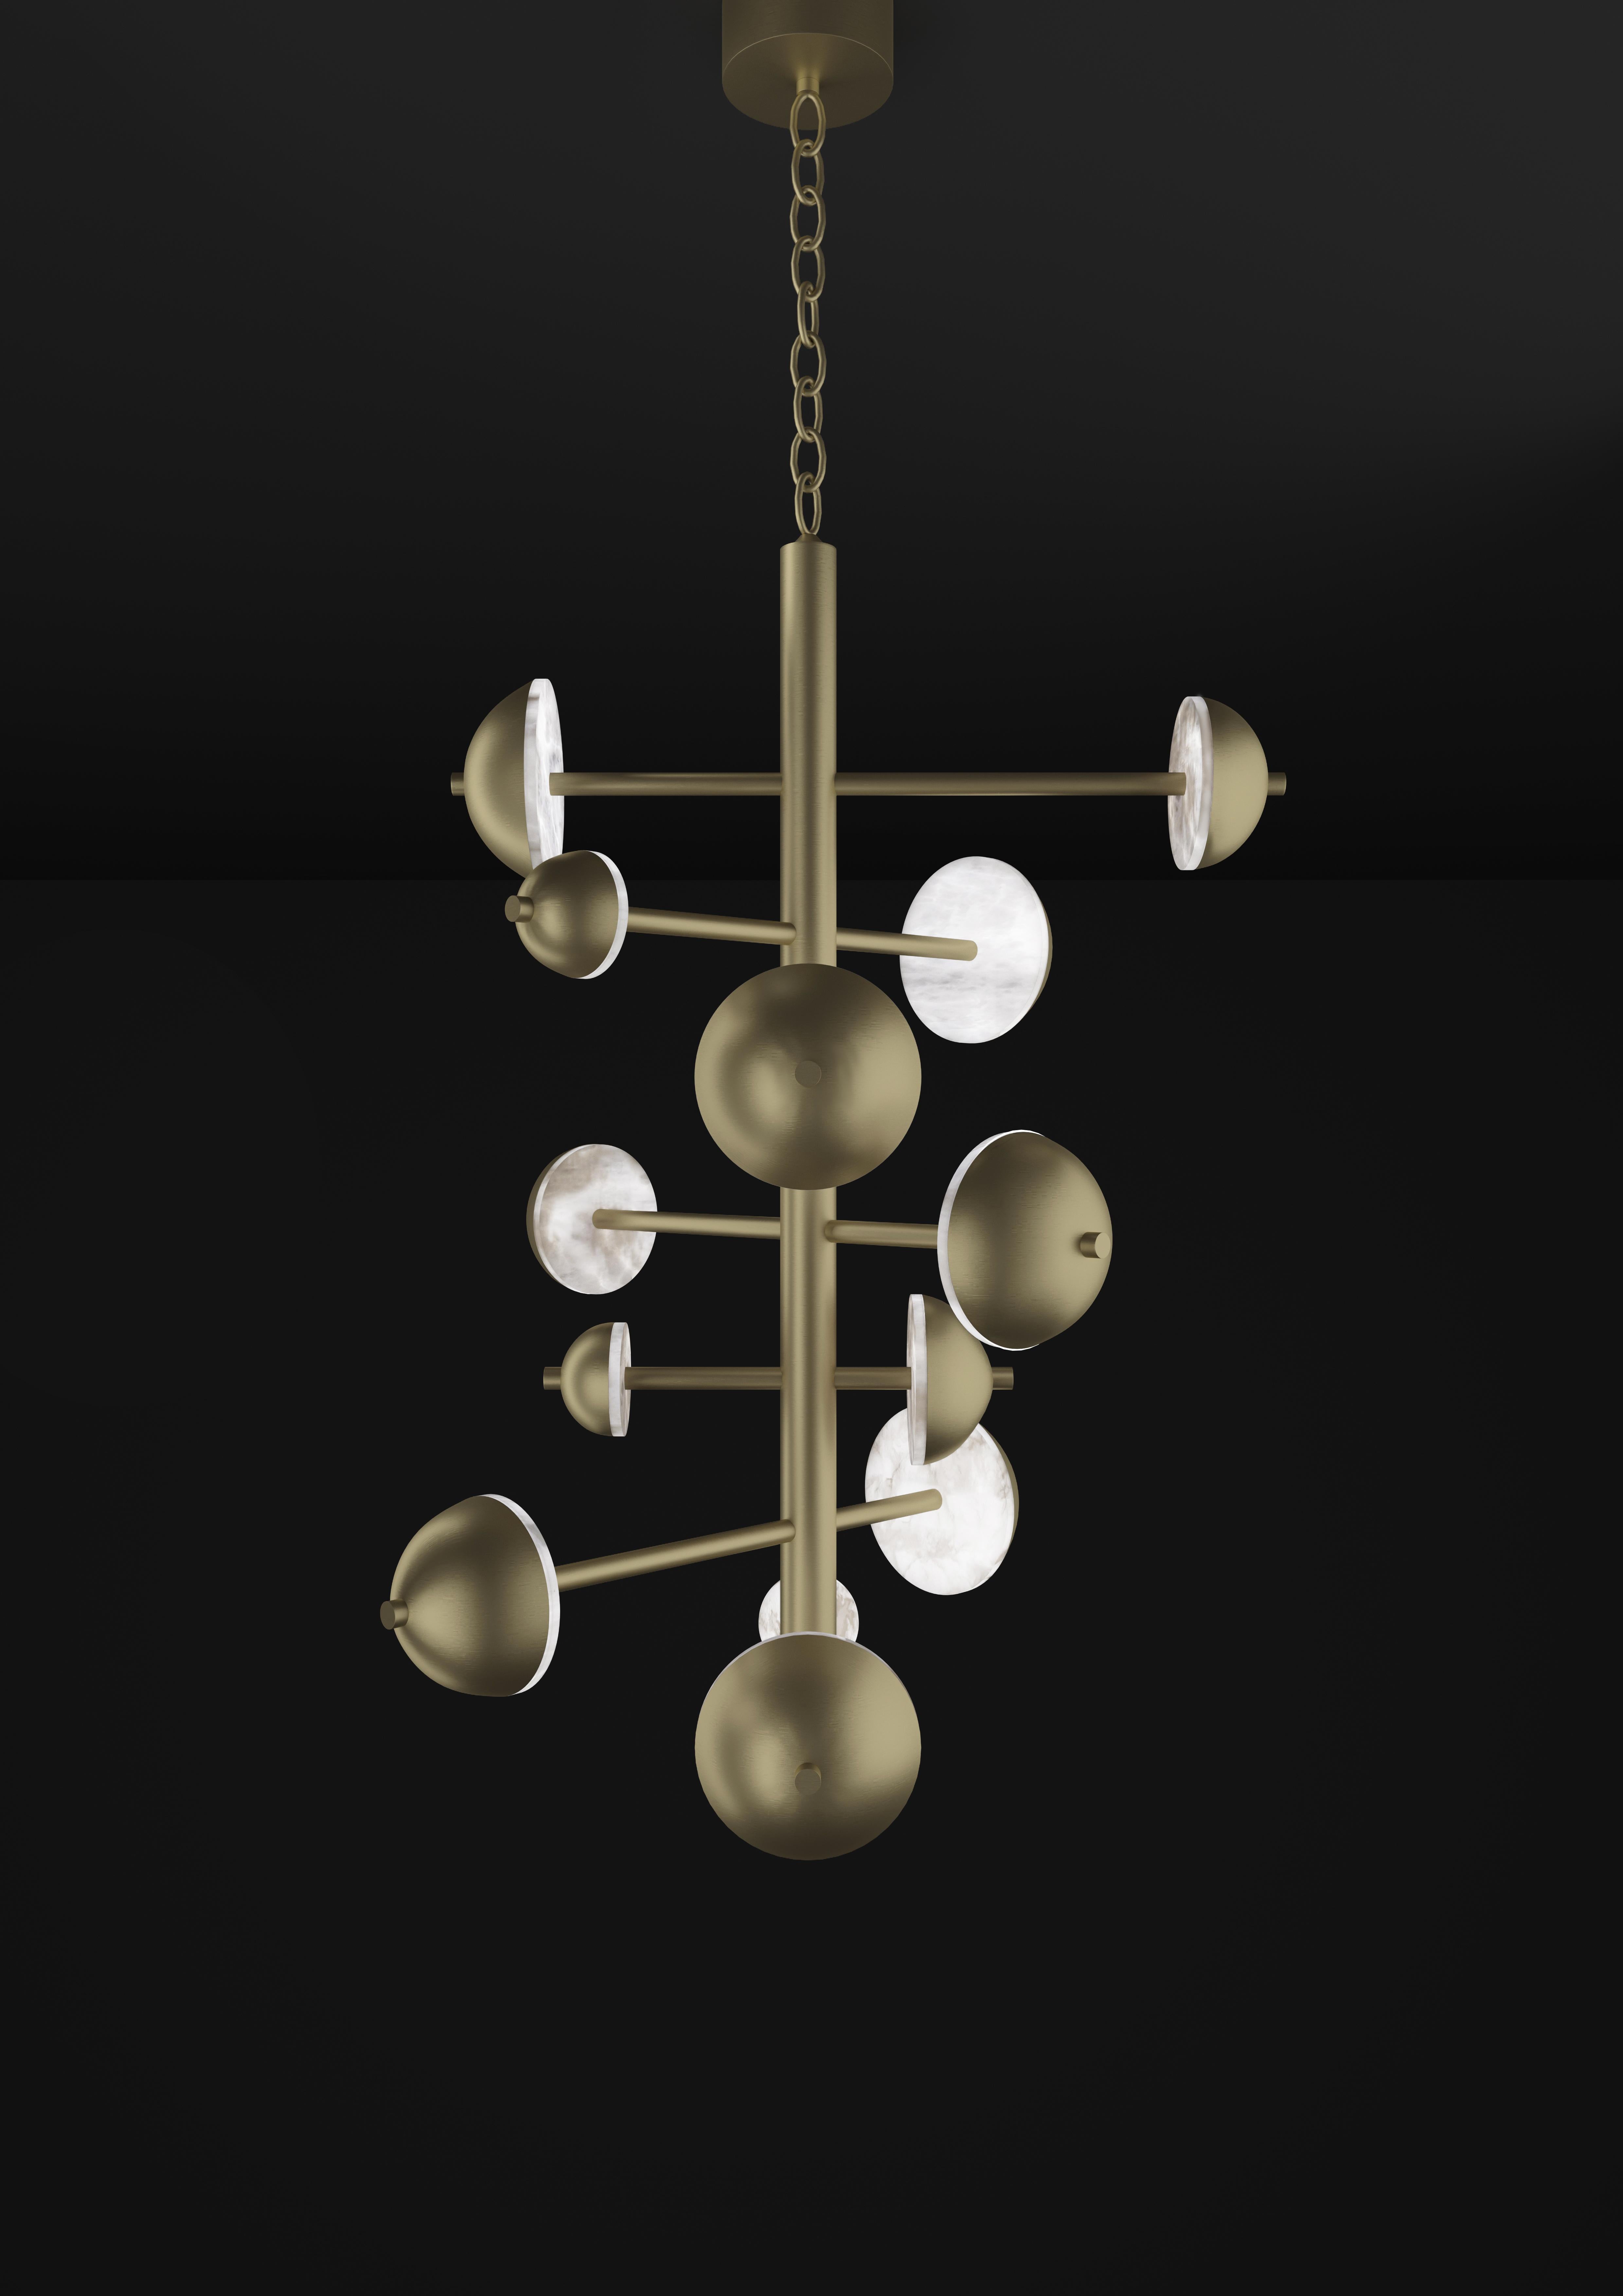 Ares Brushed Brass Chandelier by Alabastro Italiano
Dimensions: D 74,5 x W 73 x H 110 cm.
Materials: White alabaster and brass.

Available in different finishes: Shiny Silver, Bronze, Brushed Brass, Ruggine of Florence, Brushed Burnished, Shiny